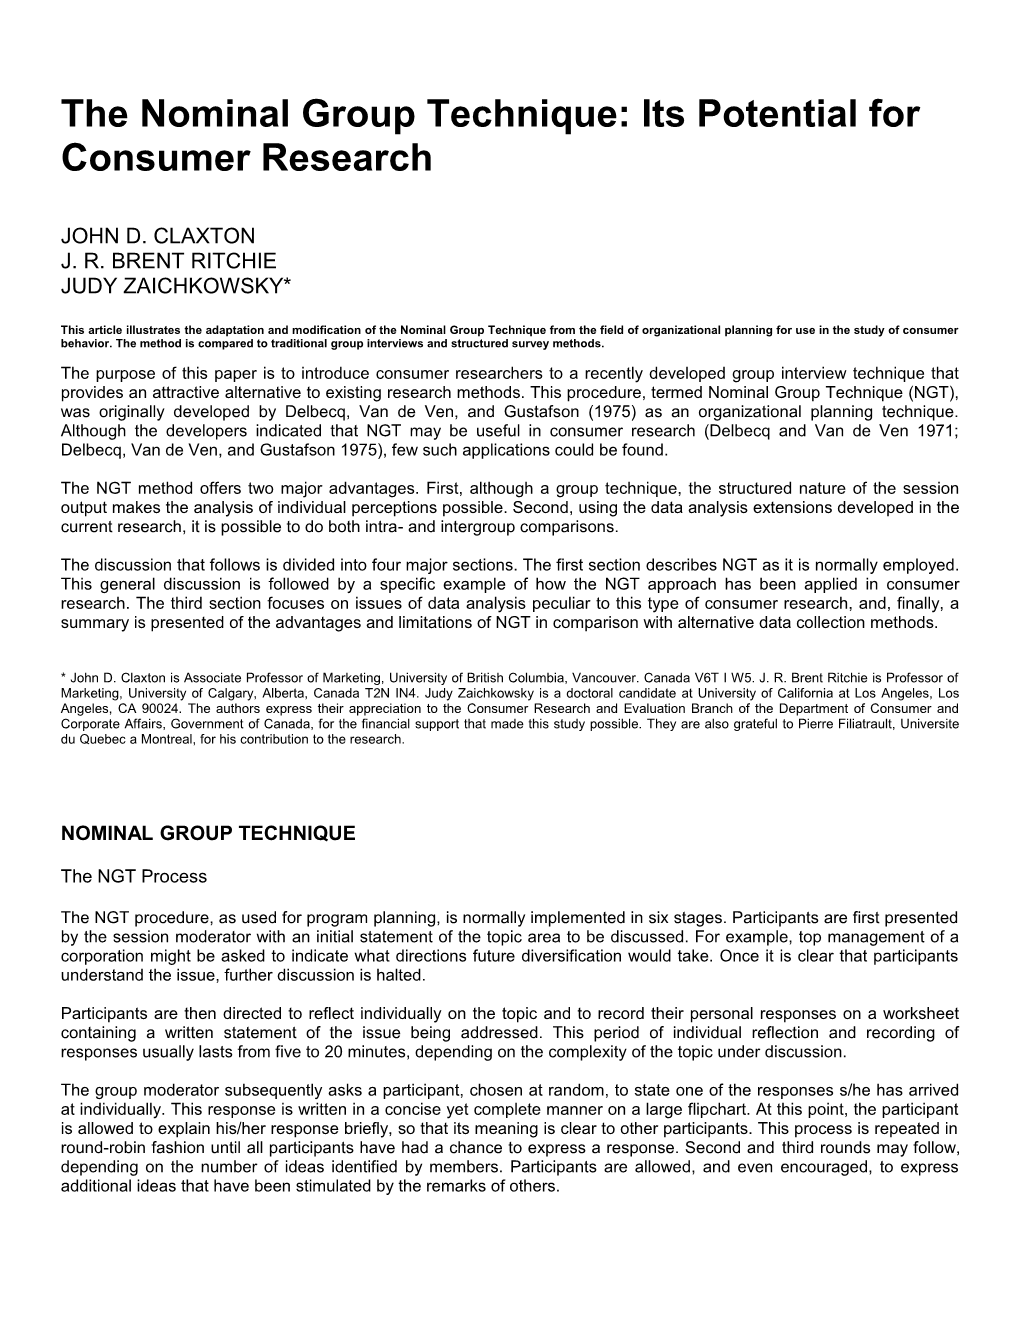 The Nominal Group Technique: Its Potential for Consumer Research